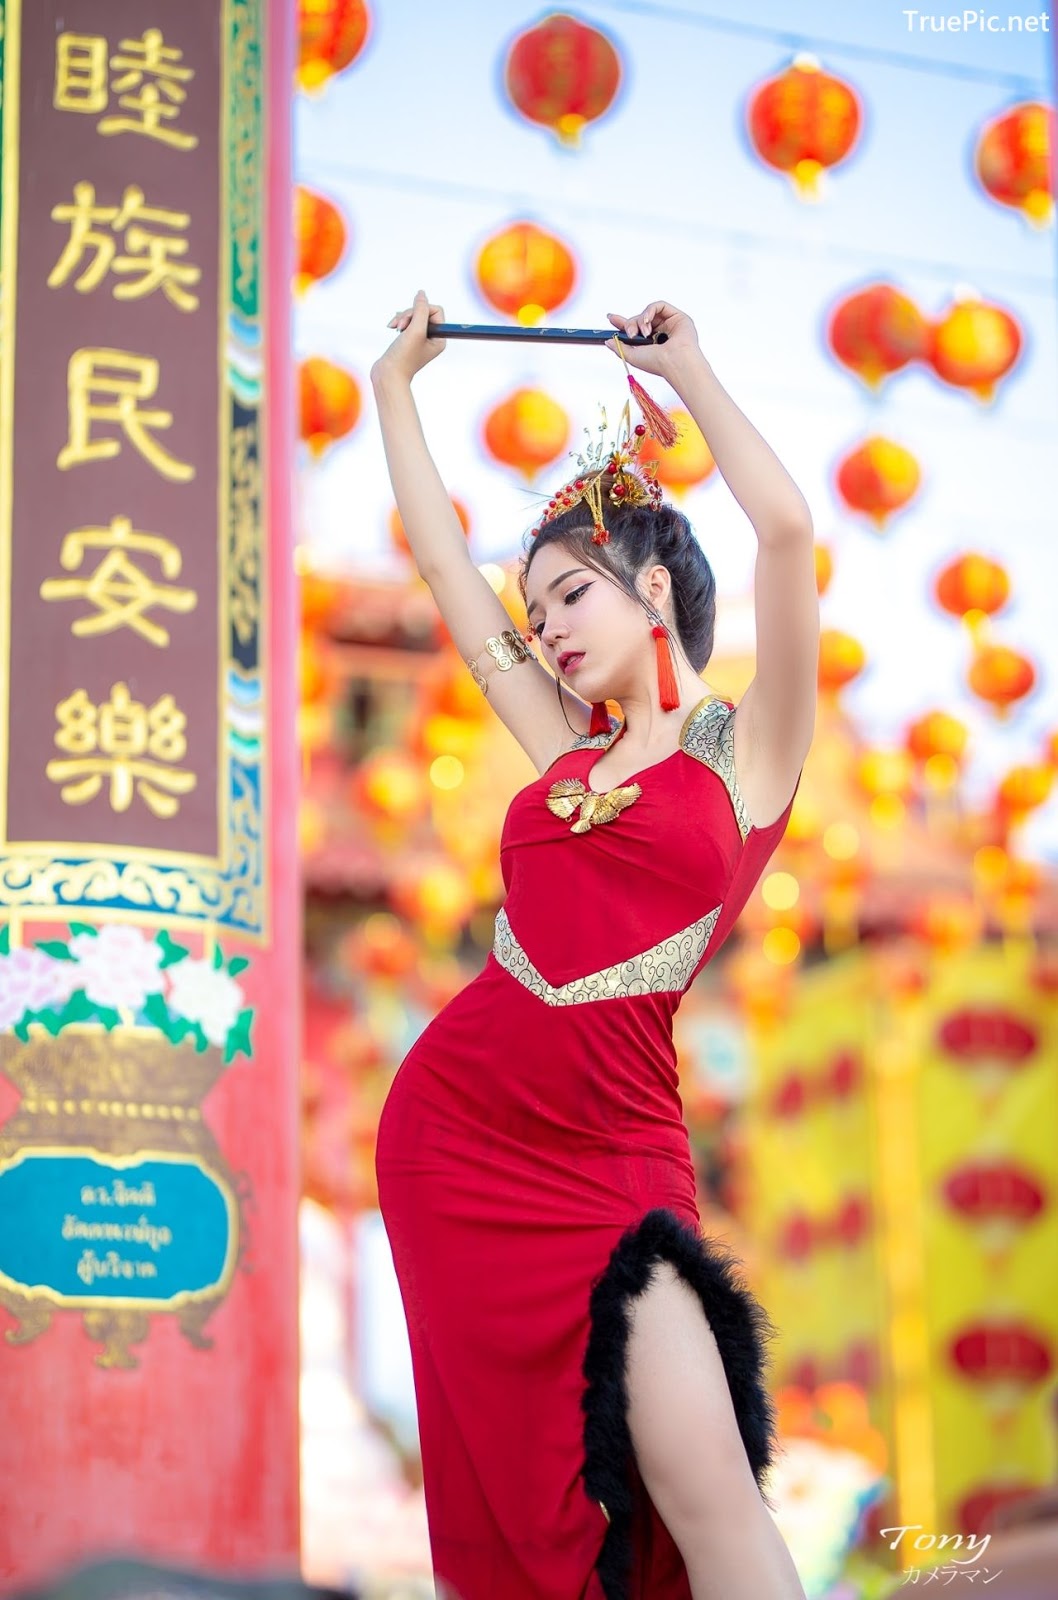 Image-Thailand-Hot-Model-Janet-Kanokwan-Saesim-Sexy-Chinese-Girl-Red-Dress-Traditional-TruePic.net- Picture-29